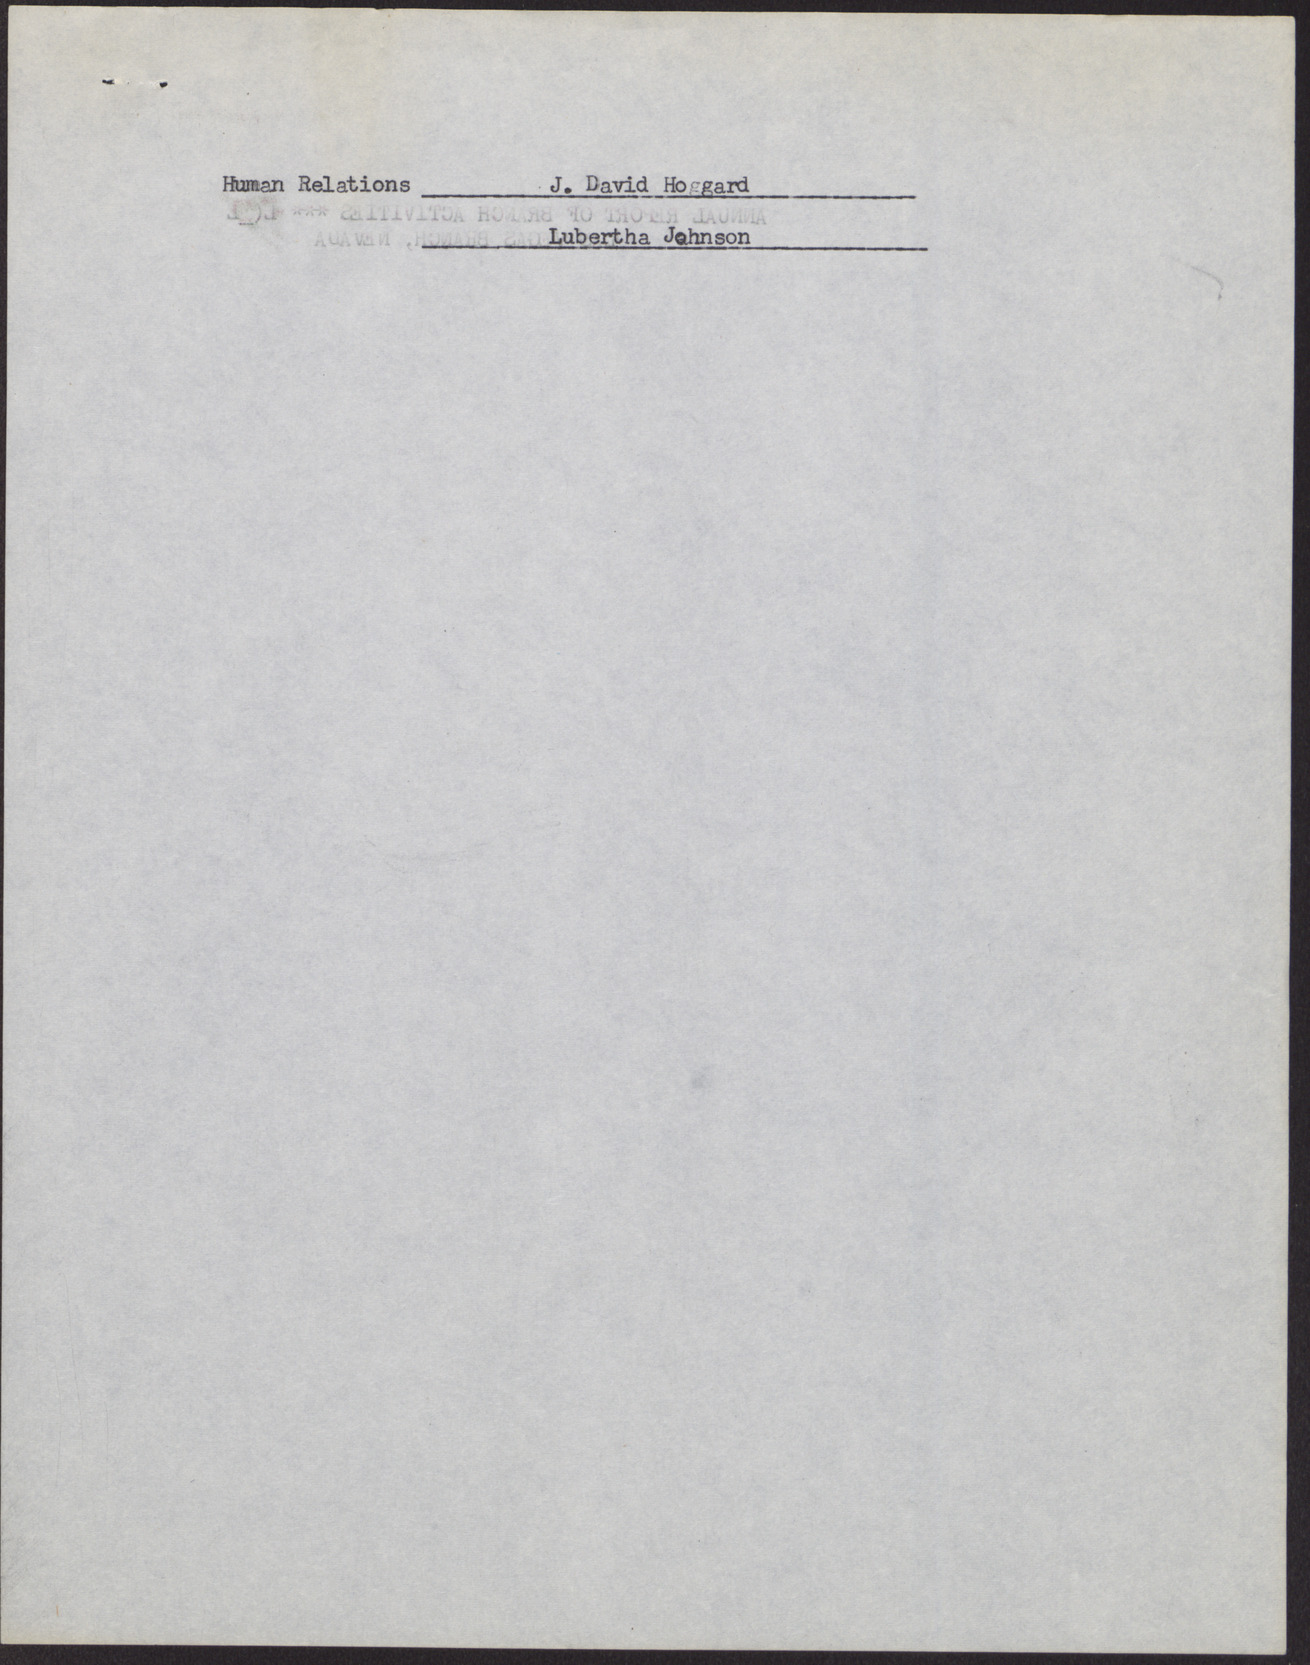 Agenda - Las Vegas NAACP Executive Committee meeting (2 pages), January 3, 1961, page 2